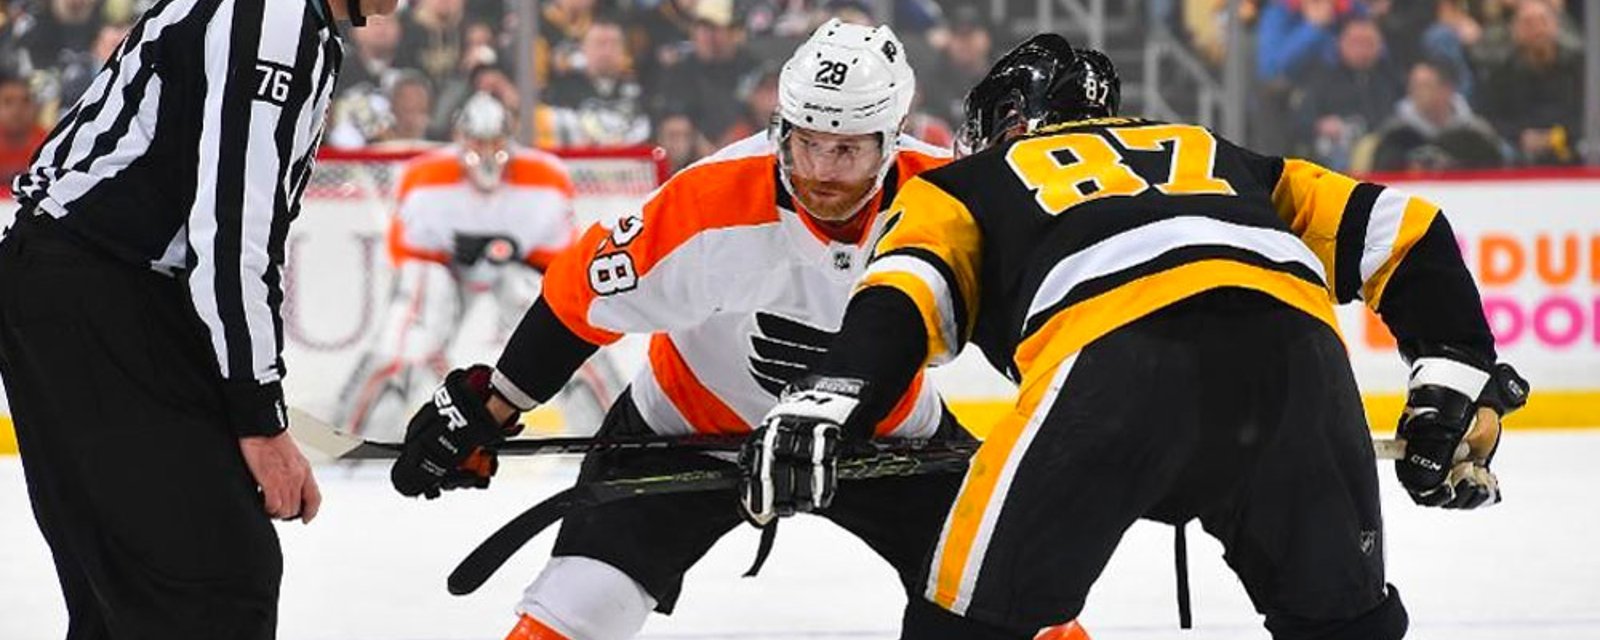 Penguins make classy move to rival Flyers before tonight's game 